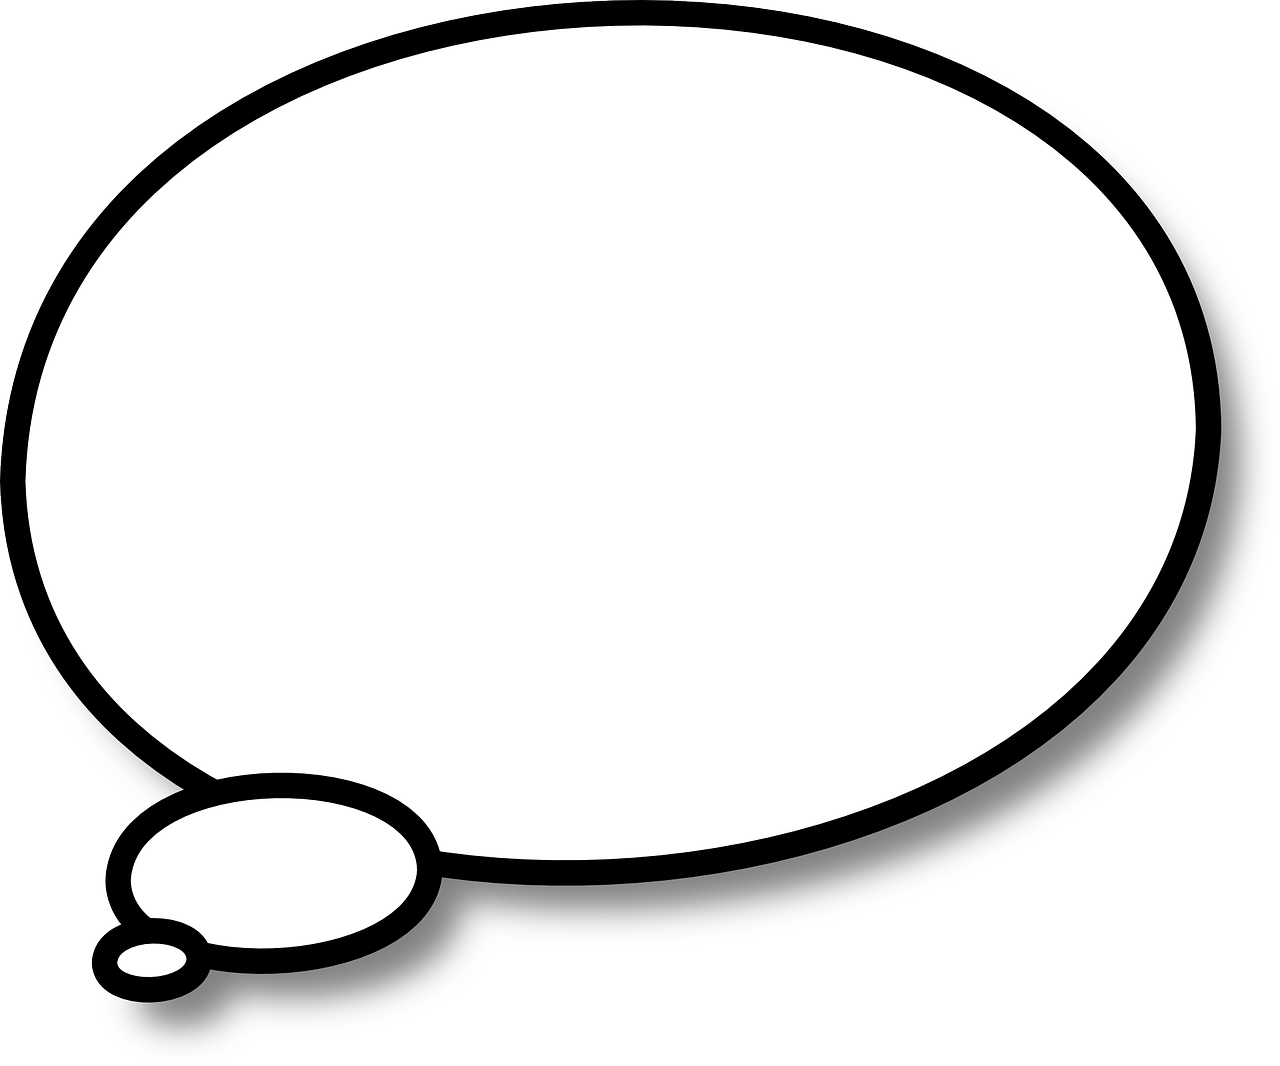 Empty Thought Bubble Graphic PNG